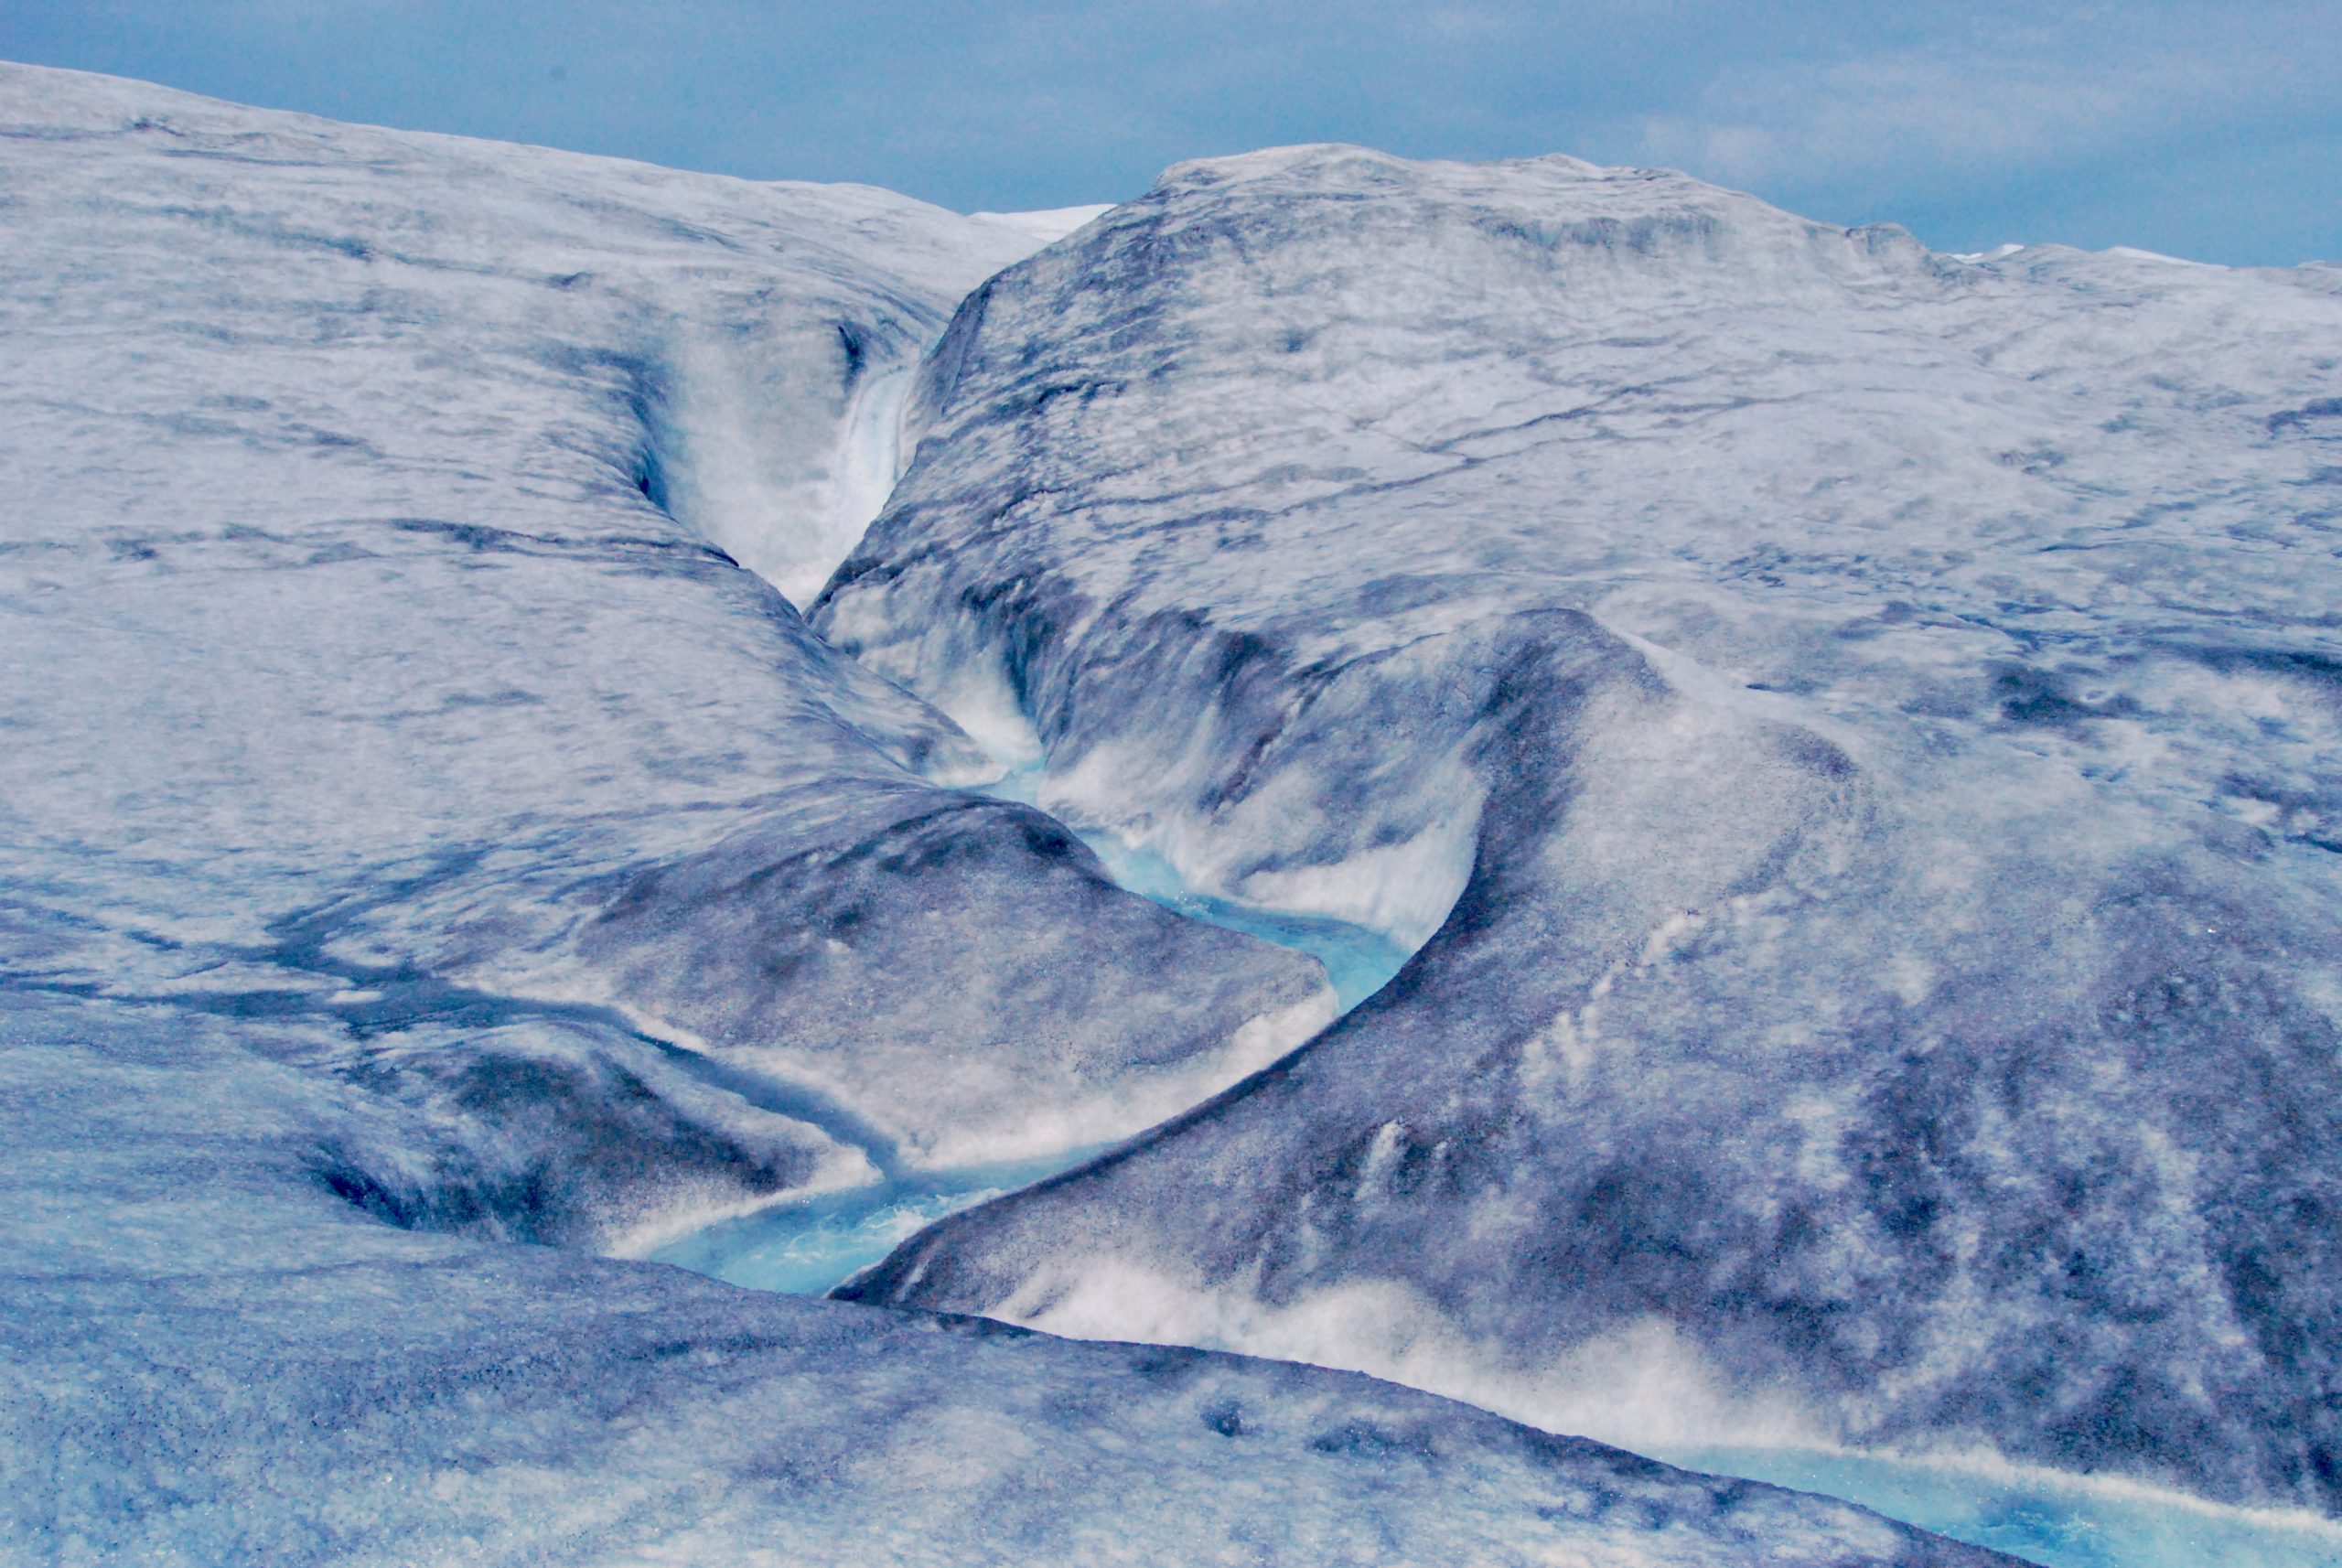 Greenland Melted Recently, Shows High Risk of Sea Level Rise Today